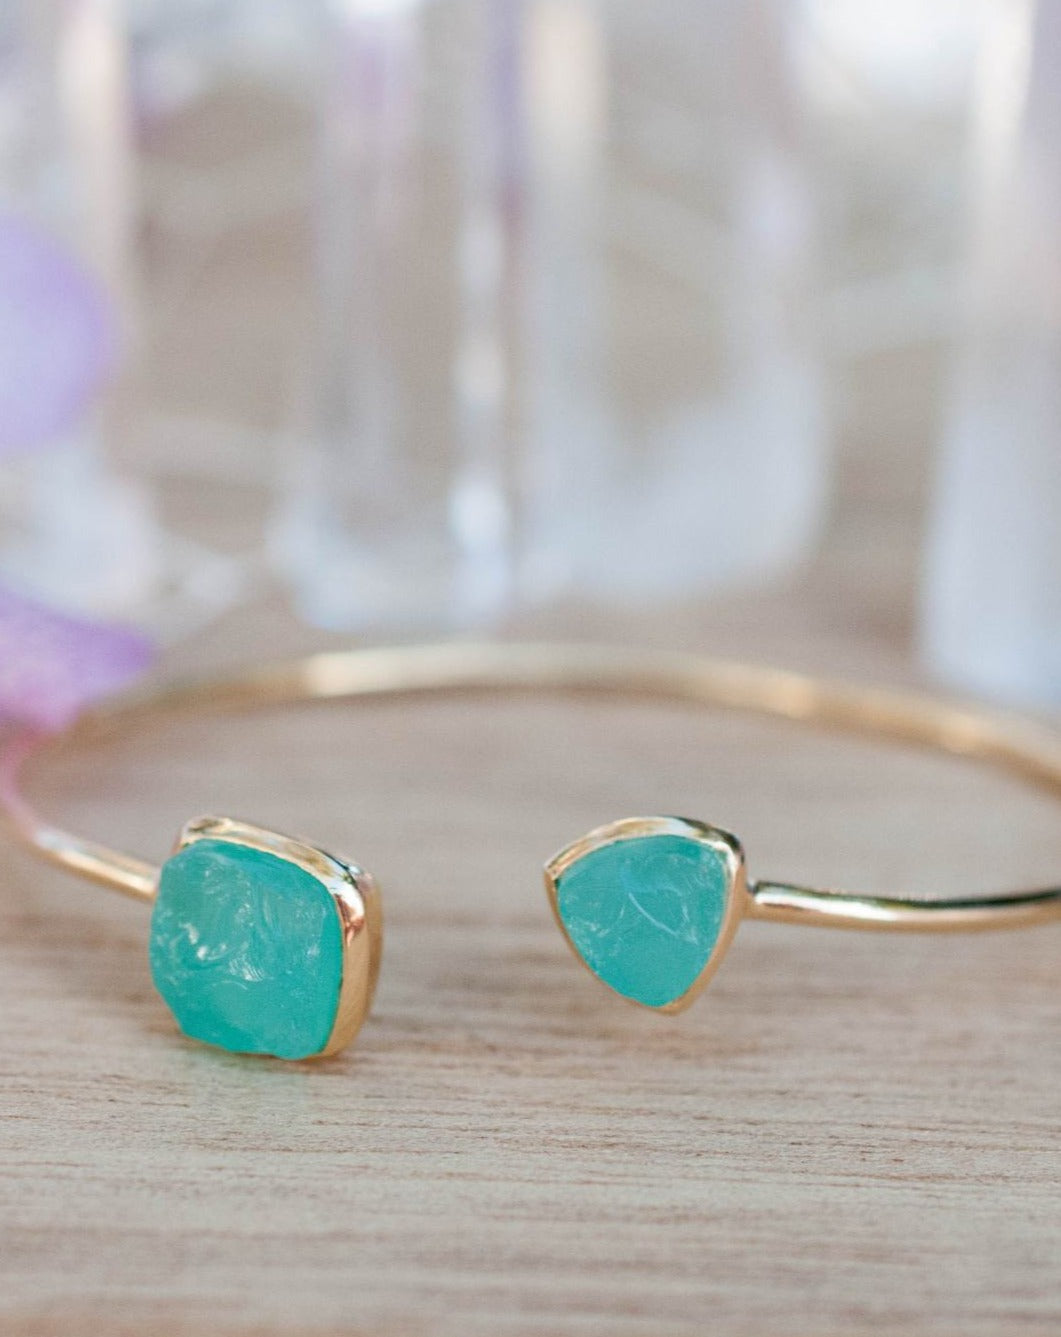 Summer Bracelet * Rough Aqua Chalcedony * Gold Plated 18k or Silver Plated * BJB008A